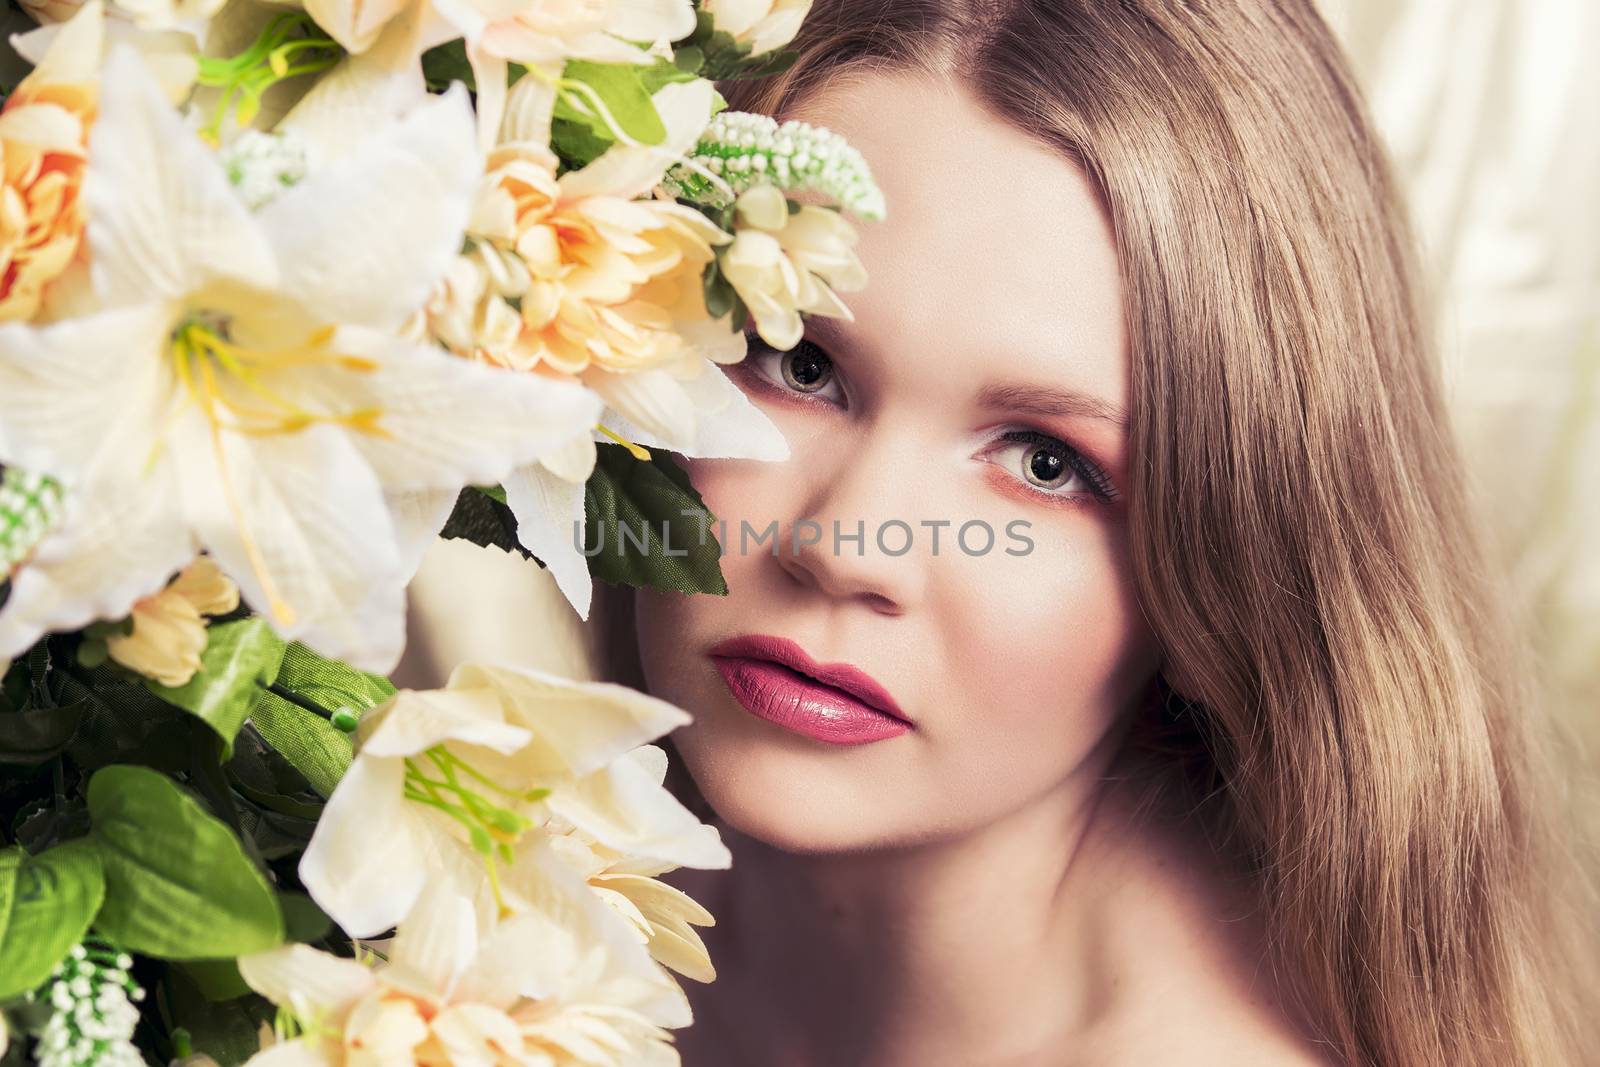 Cinematic portrait of a beautiful blonde woman with flowers all around her.